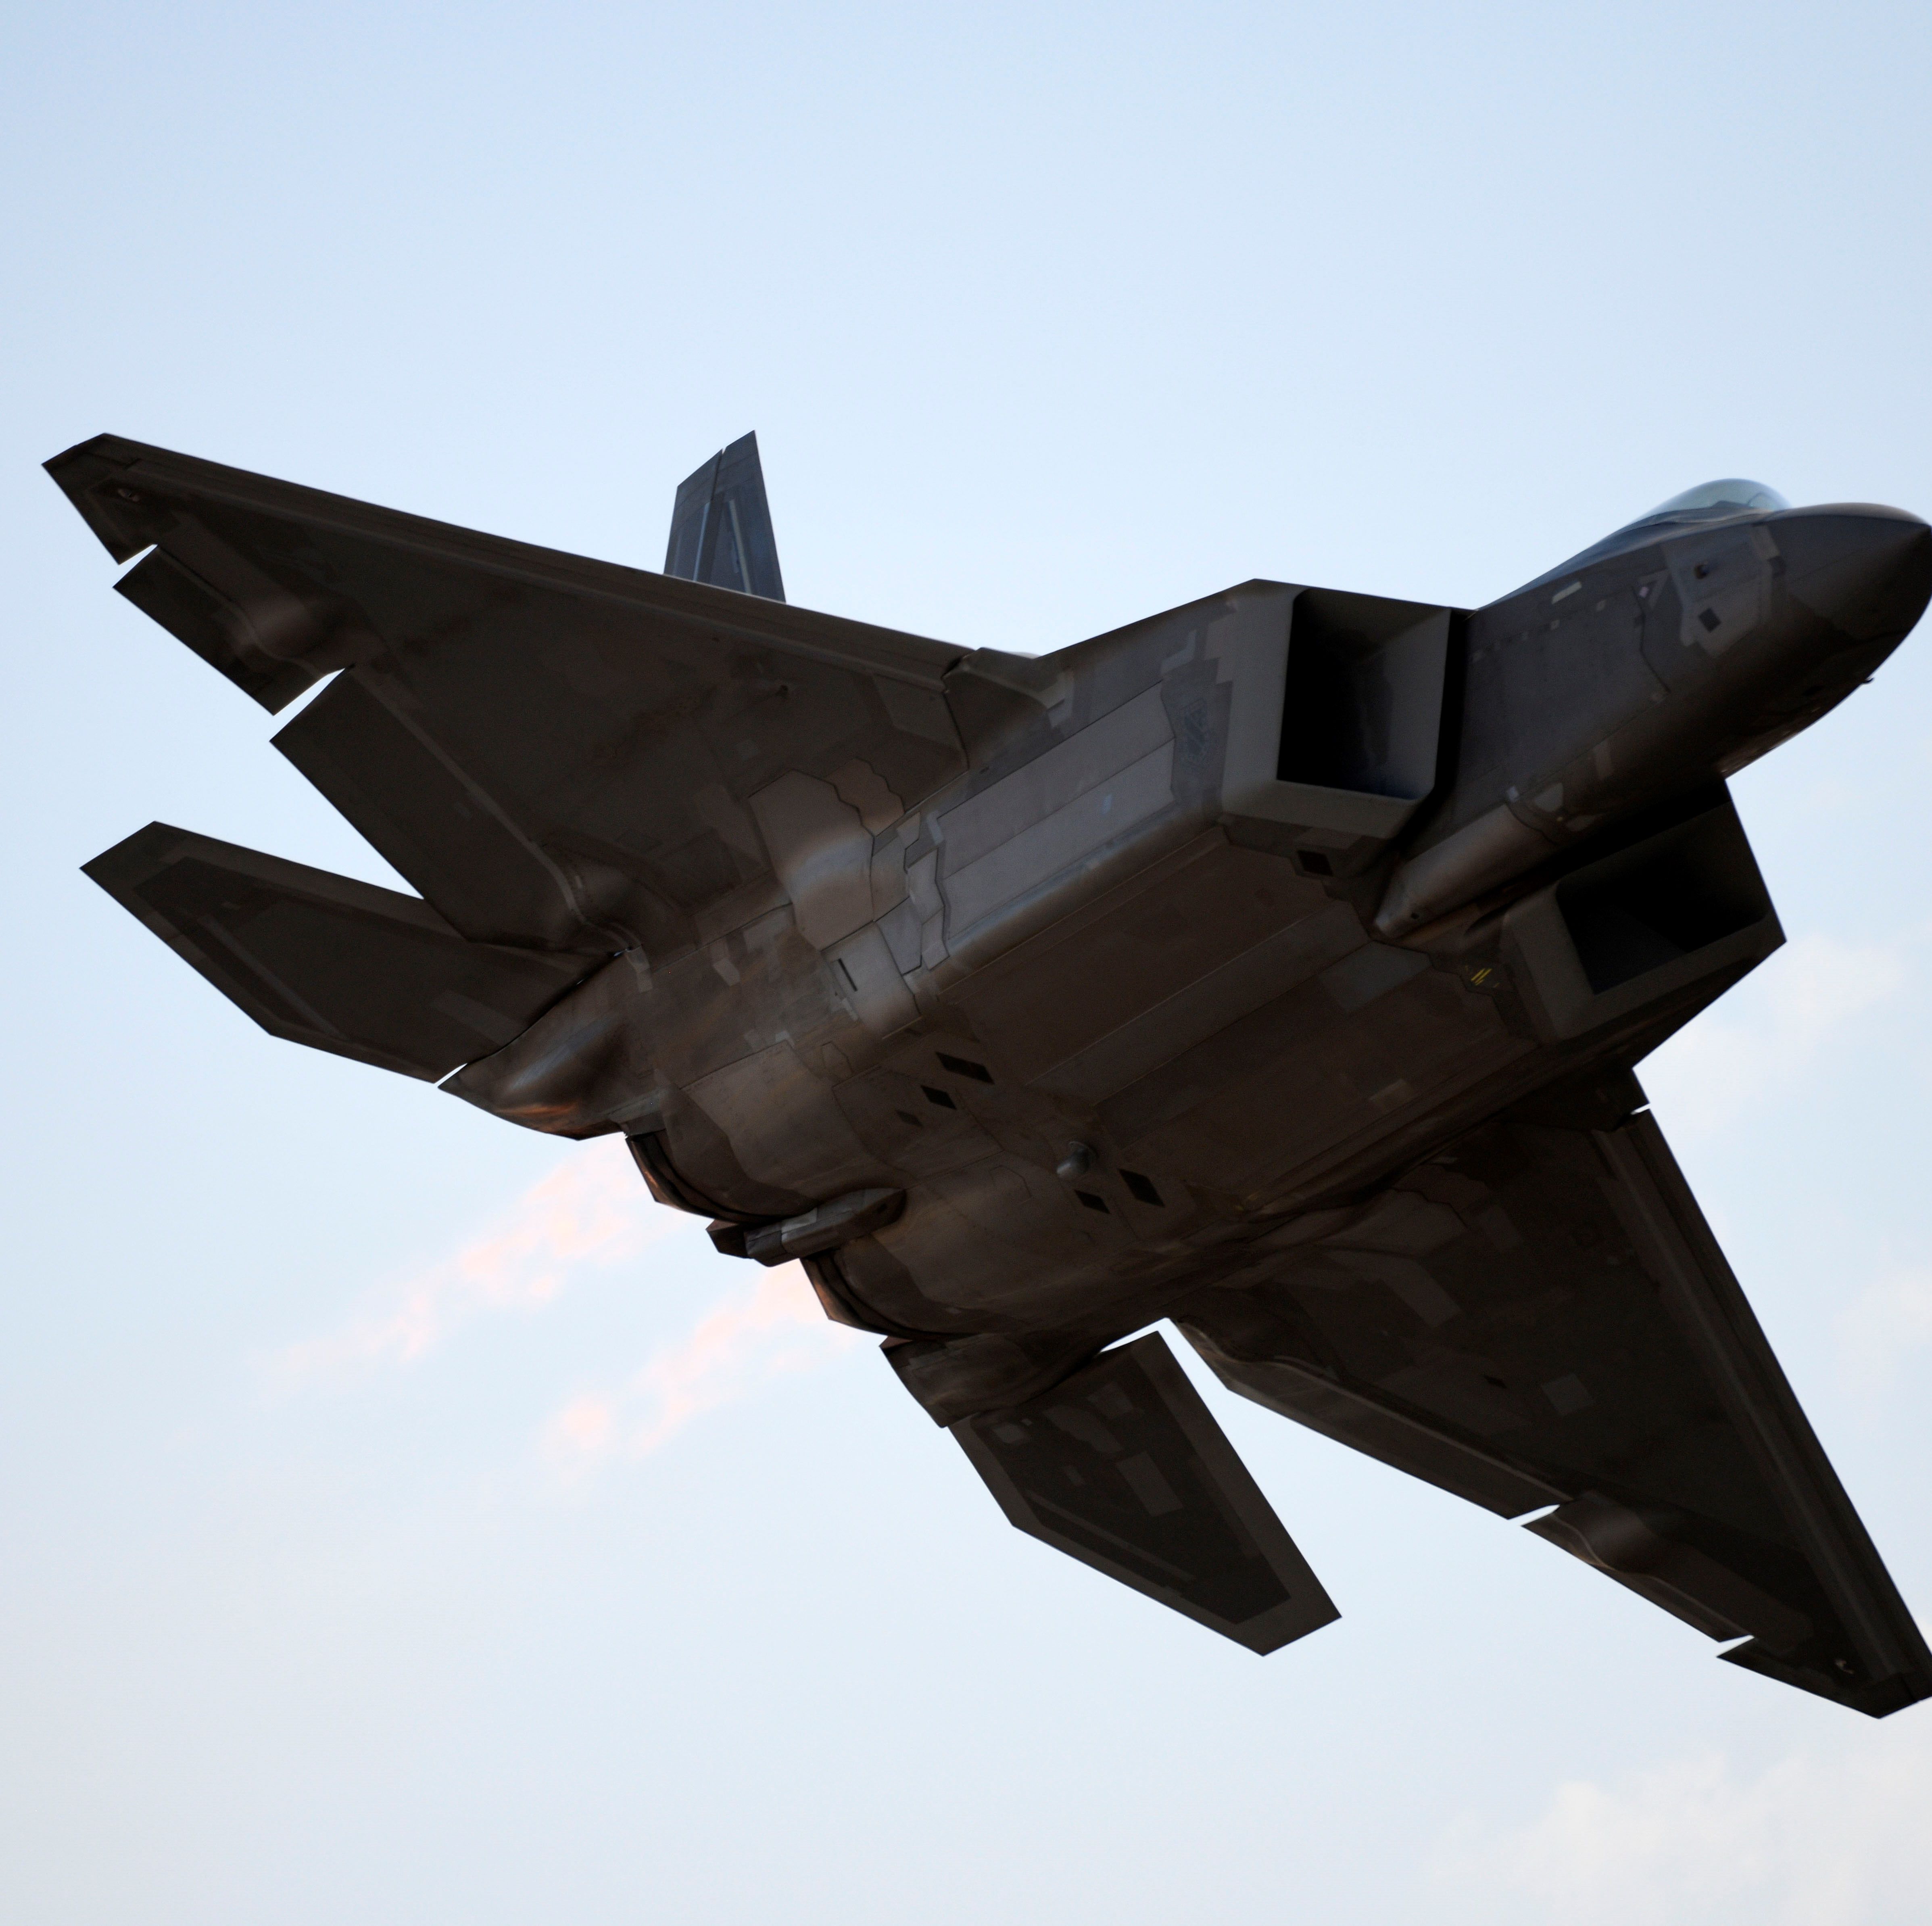 The Air Force Wants to Give the F-22 Raptor an Early Retirement